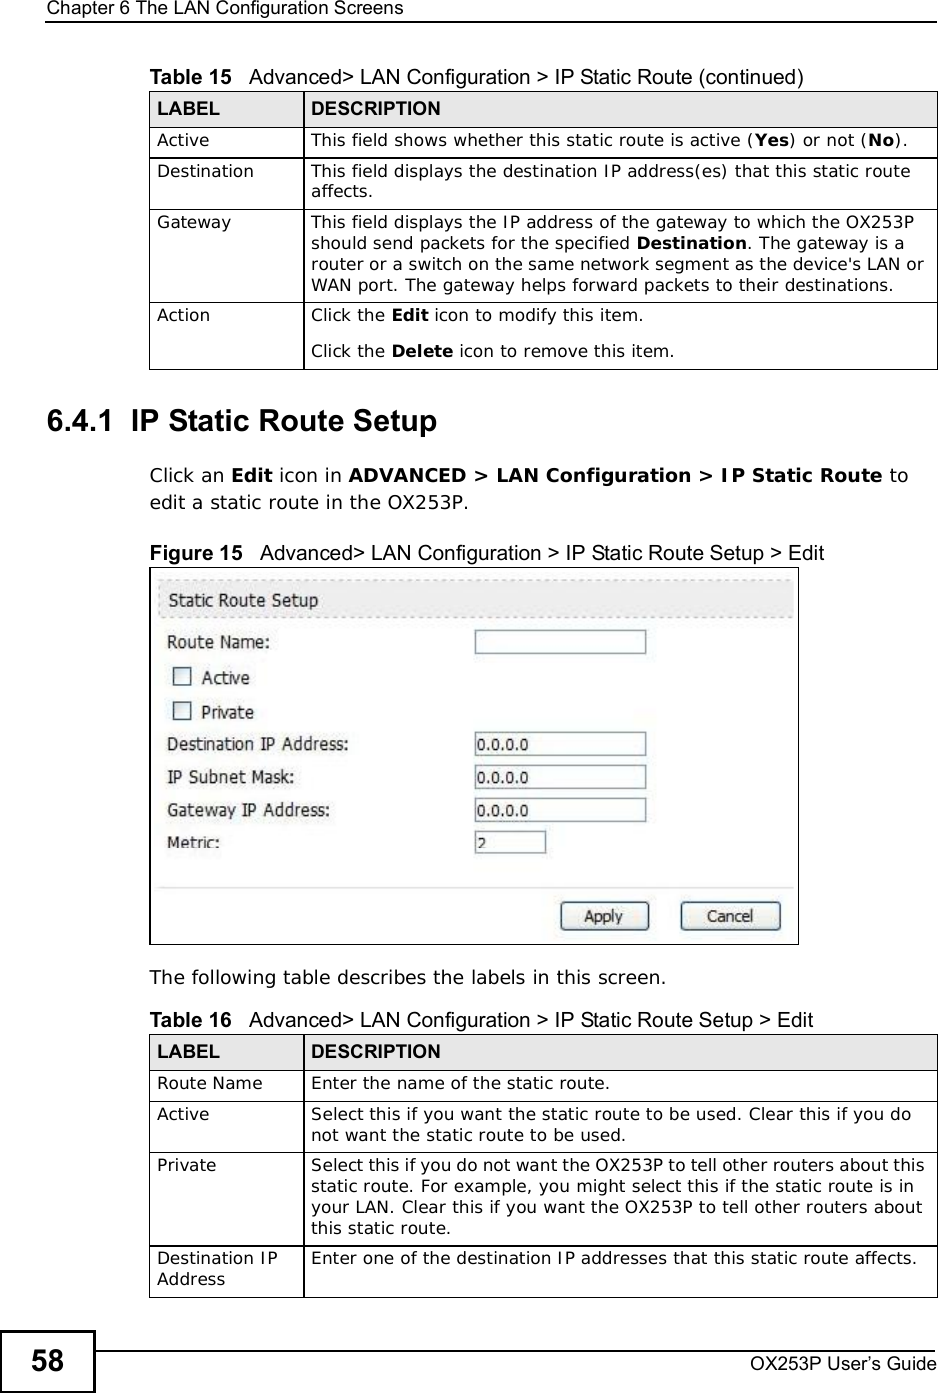 Chapter 6The LAN Configuration ScreensOX253P User’s Guide586.4.1  IP Static Route SetupClick an Edit icon in ADVANCED &gt; LAN Configuration &gt; IP Static Route to edit a static route in the OX253P.Figure 15   Advanced&gt; LAN Configuration &gt; IP Static Route Setup &gt; EditThe following table describes the labels in this screen.Active This field shows whether this static route is active (Yes) or not (No).Destination This field displays the destination IP address(es) that this static route affects.Gateway This field displays the IP address of the gateway to which the OX253P should send packets for the specified Destination. The gateway is a router or a switch on the same network segment as the device&apos;s LAN or WAN port. The gateway helps forward packets to their destinations.Action Click the Edit icon to modify this item.Click the Delete icon to remove this item.Table 15   Advanced&gt; LAN Configuration &gt; IP Static Route (continued)LABEL DESCRIPTIONTable 16   Advanced&gt; LAN Configuration &gt; IP Static Route Setup &gt; EditLABEL DESCRIPTIONRoute Name Enter the name of the static route.Active Select this if you want the static route to be used. Clear this if you do not want the static route to be used.Private Select this if you do not want the OX253P to tell other routers about this static route. For example, you might select this if the static route is in your LAN. Clear this if you want the OX253P to tell other routers about this static route.Destination IP Address Enter one of the destination IP addresses that this static route affects.